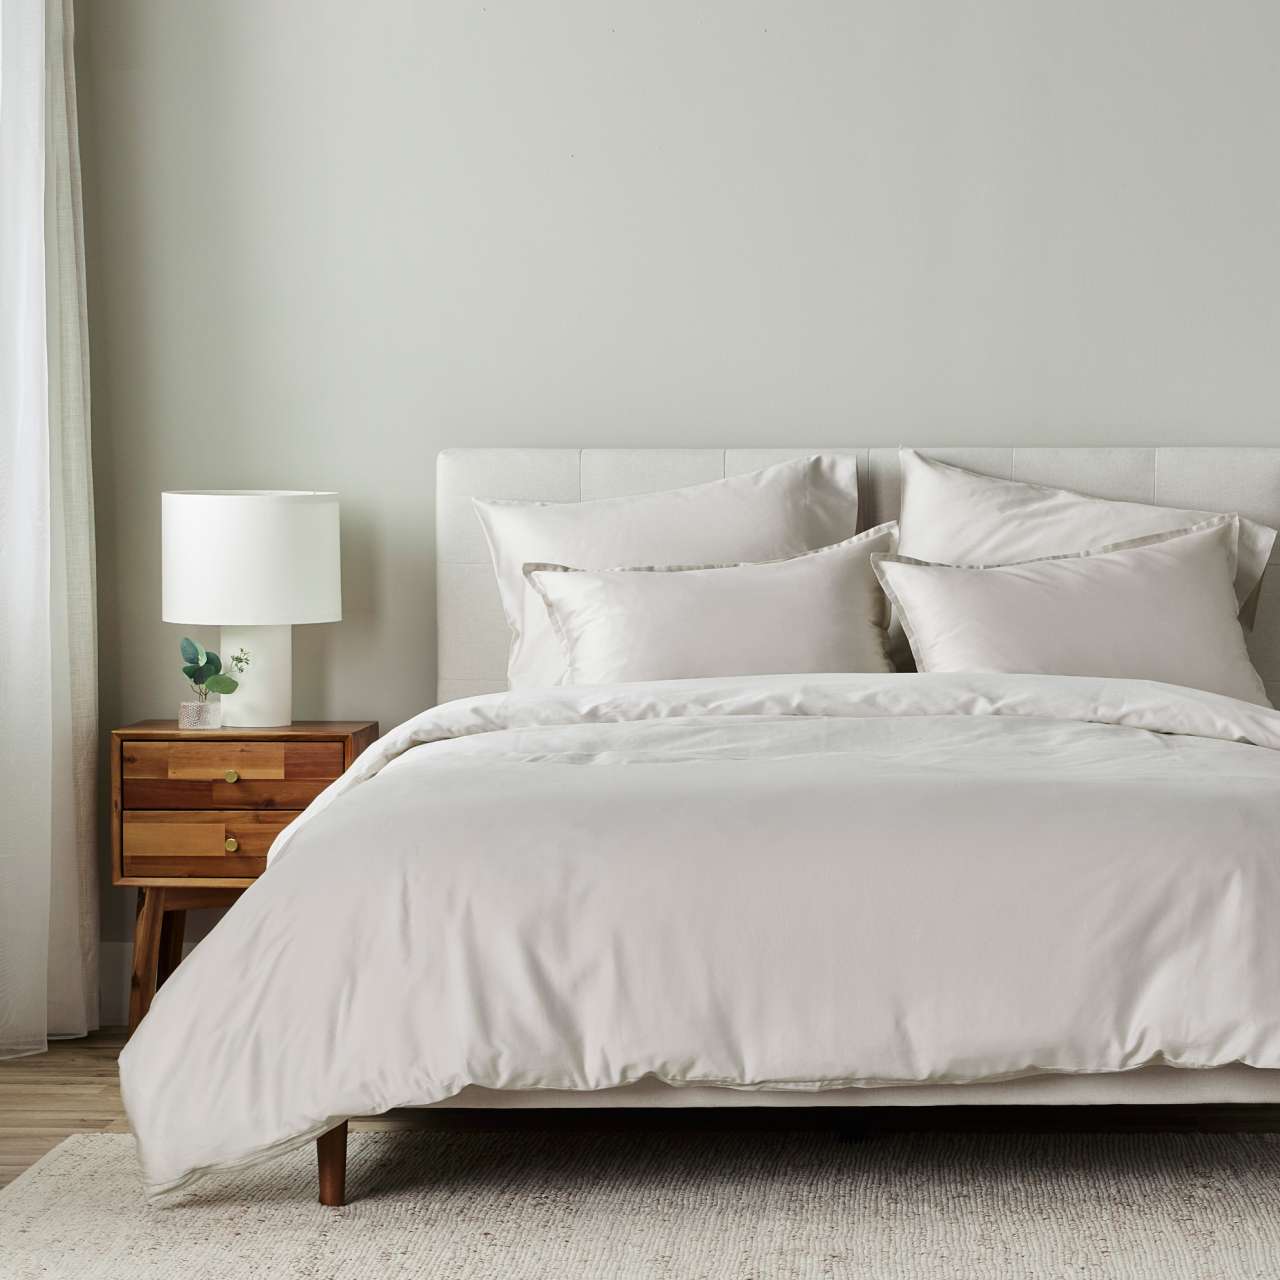 Egyptian Cotton Bed Sheets Image 3